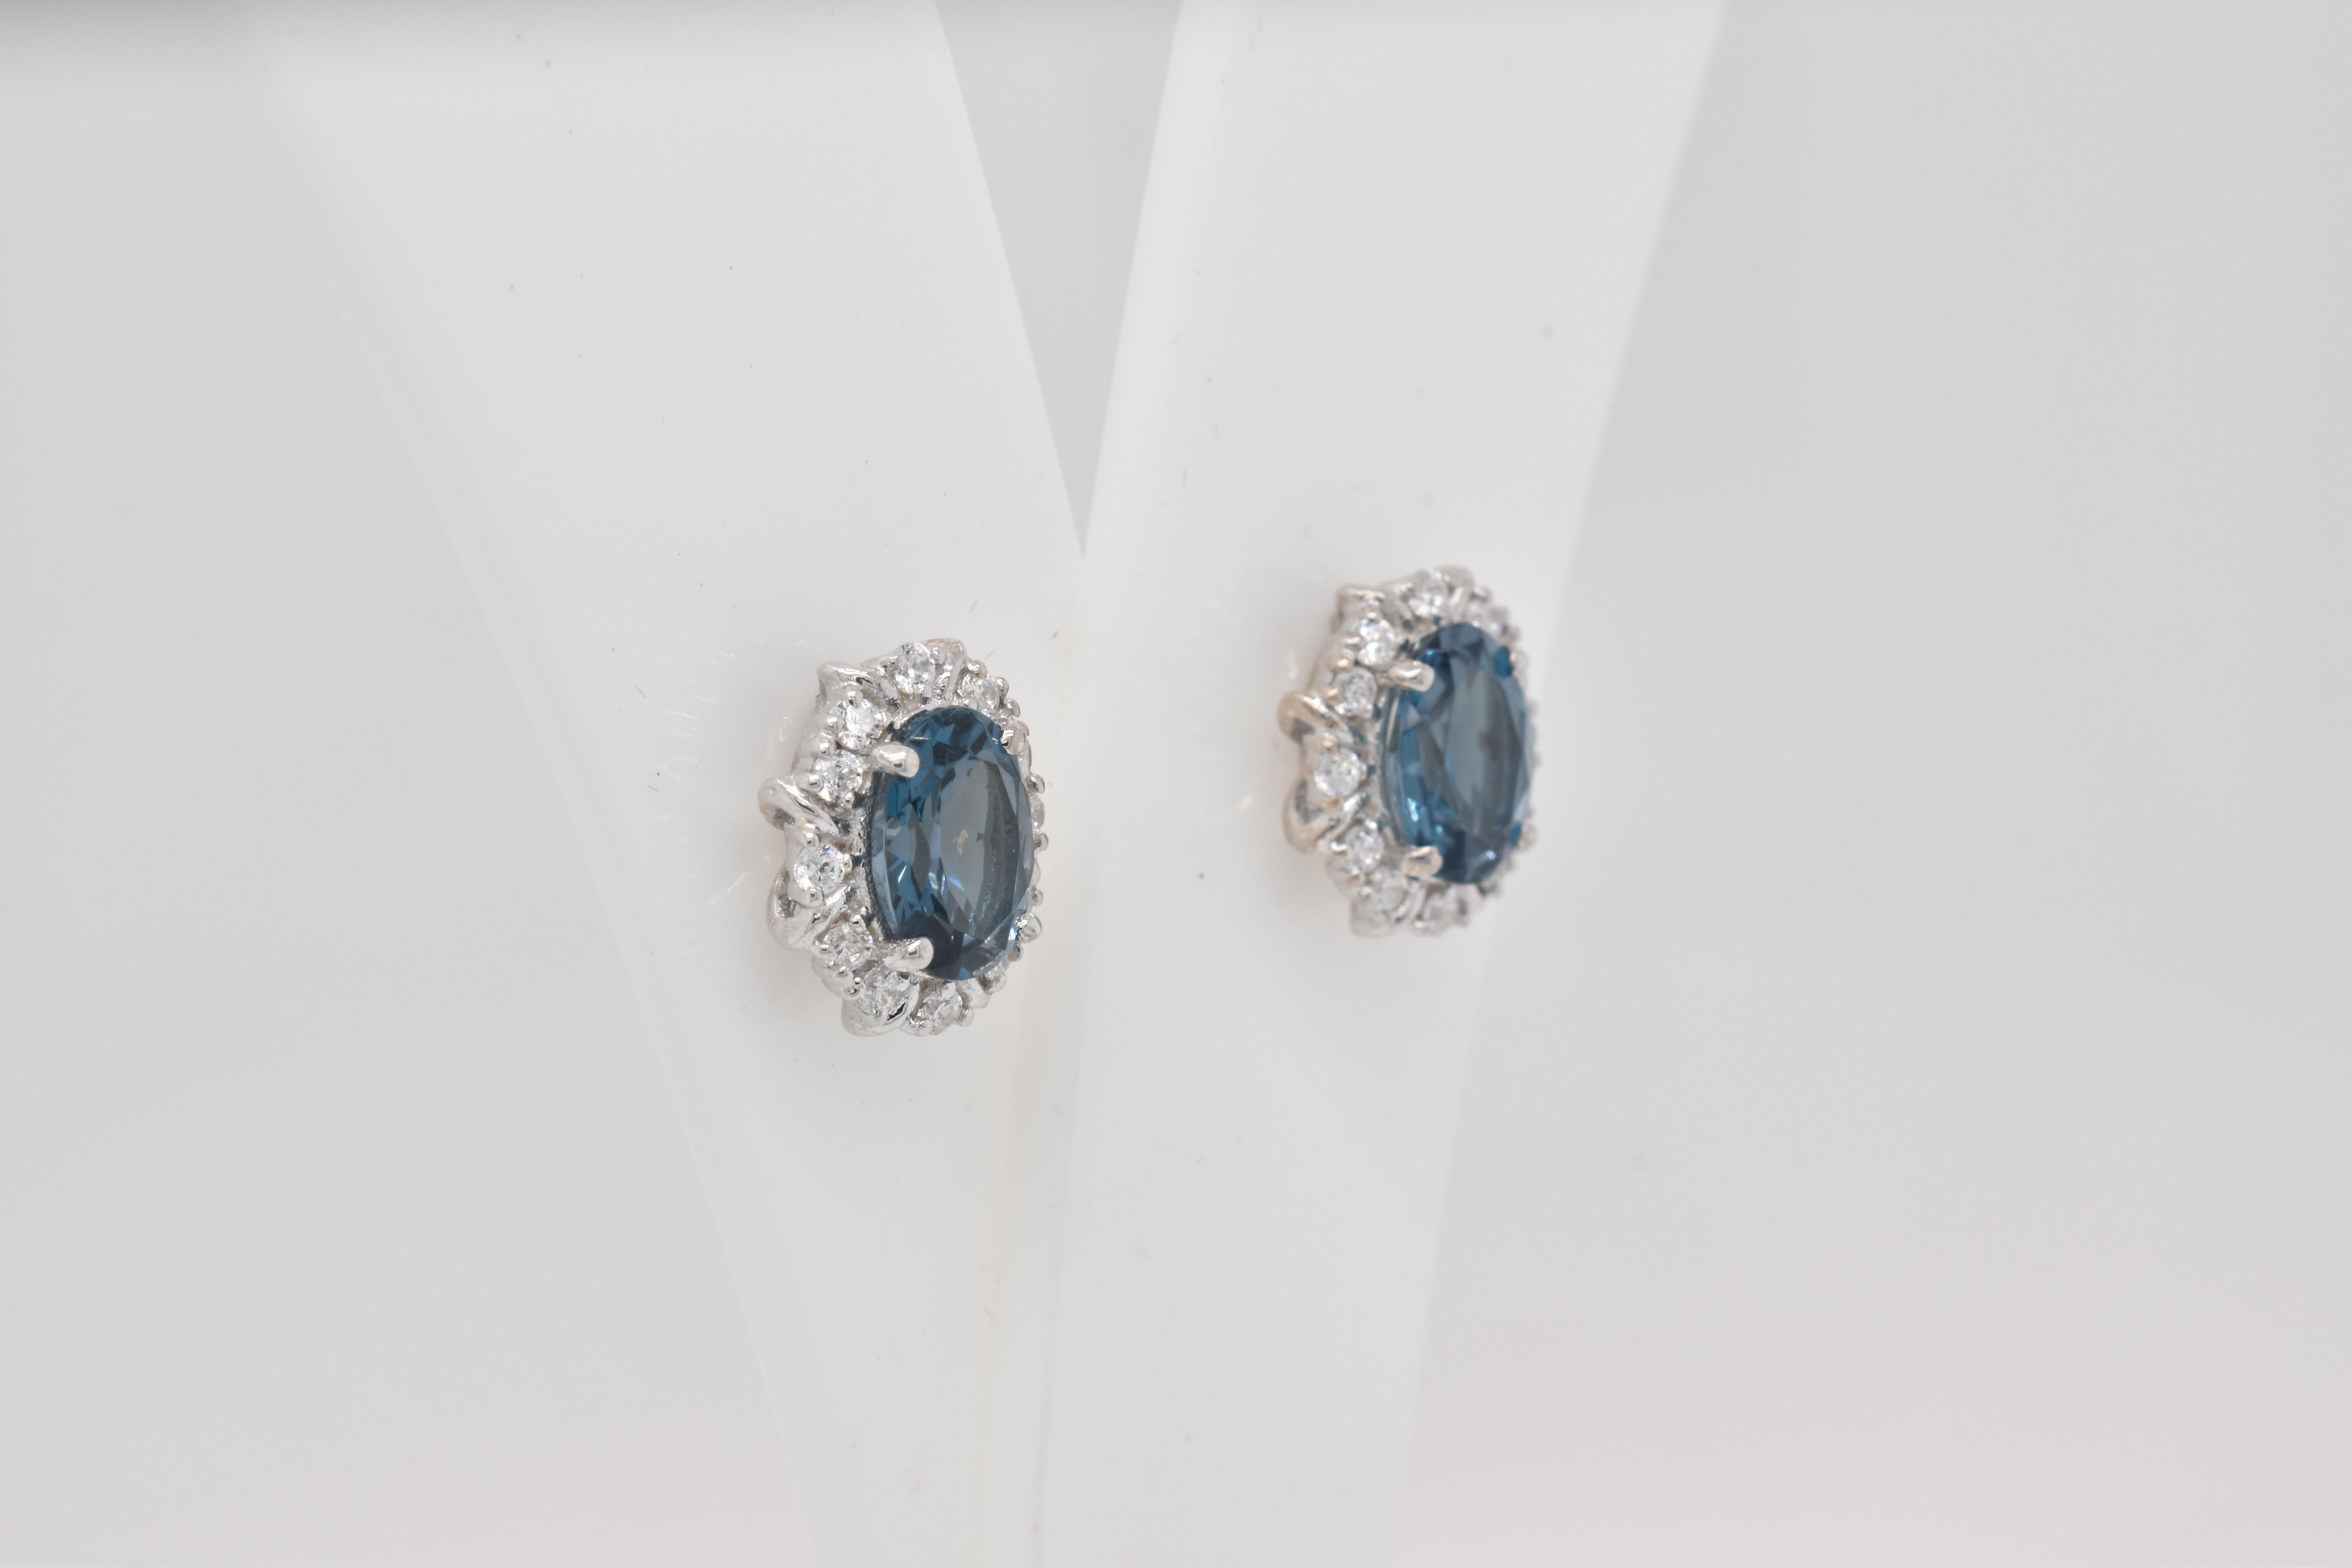 Oval Shape London Blue Topaz Gemstone And CZ beautifully crafted  in a Earrings. A fiery Blue color December Birthstone. For a special occasion like Engagement or Proposal or may be as a gift for a special person.

Primary Stone Size - 7x5 mm